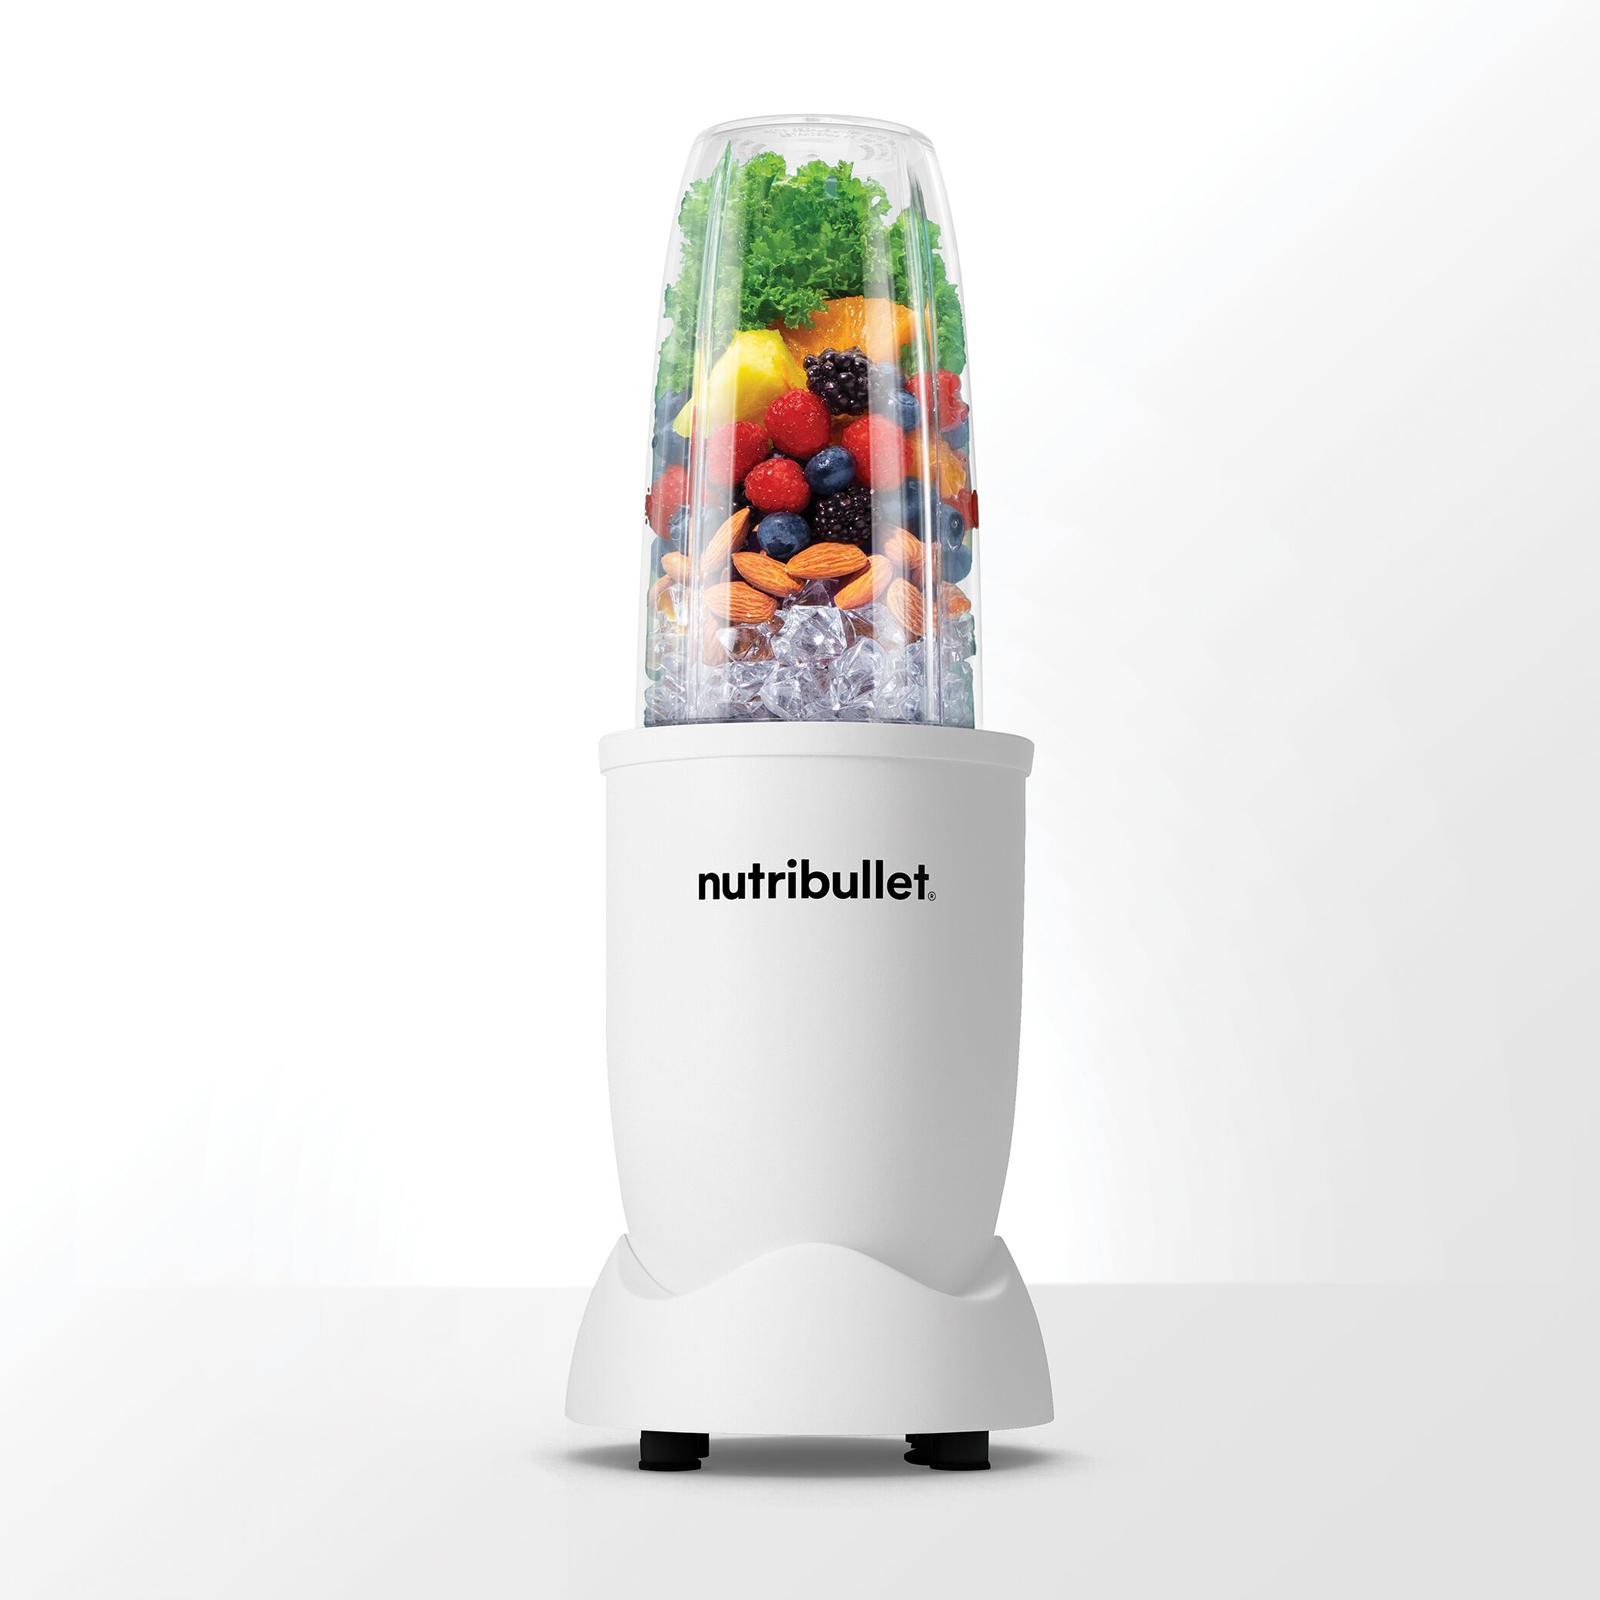 I Use This Small-but-Mighty Nutribullet Blender Every Day in the